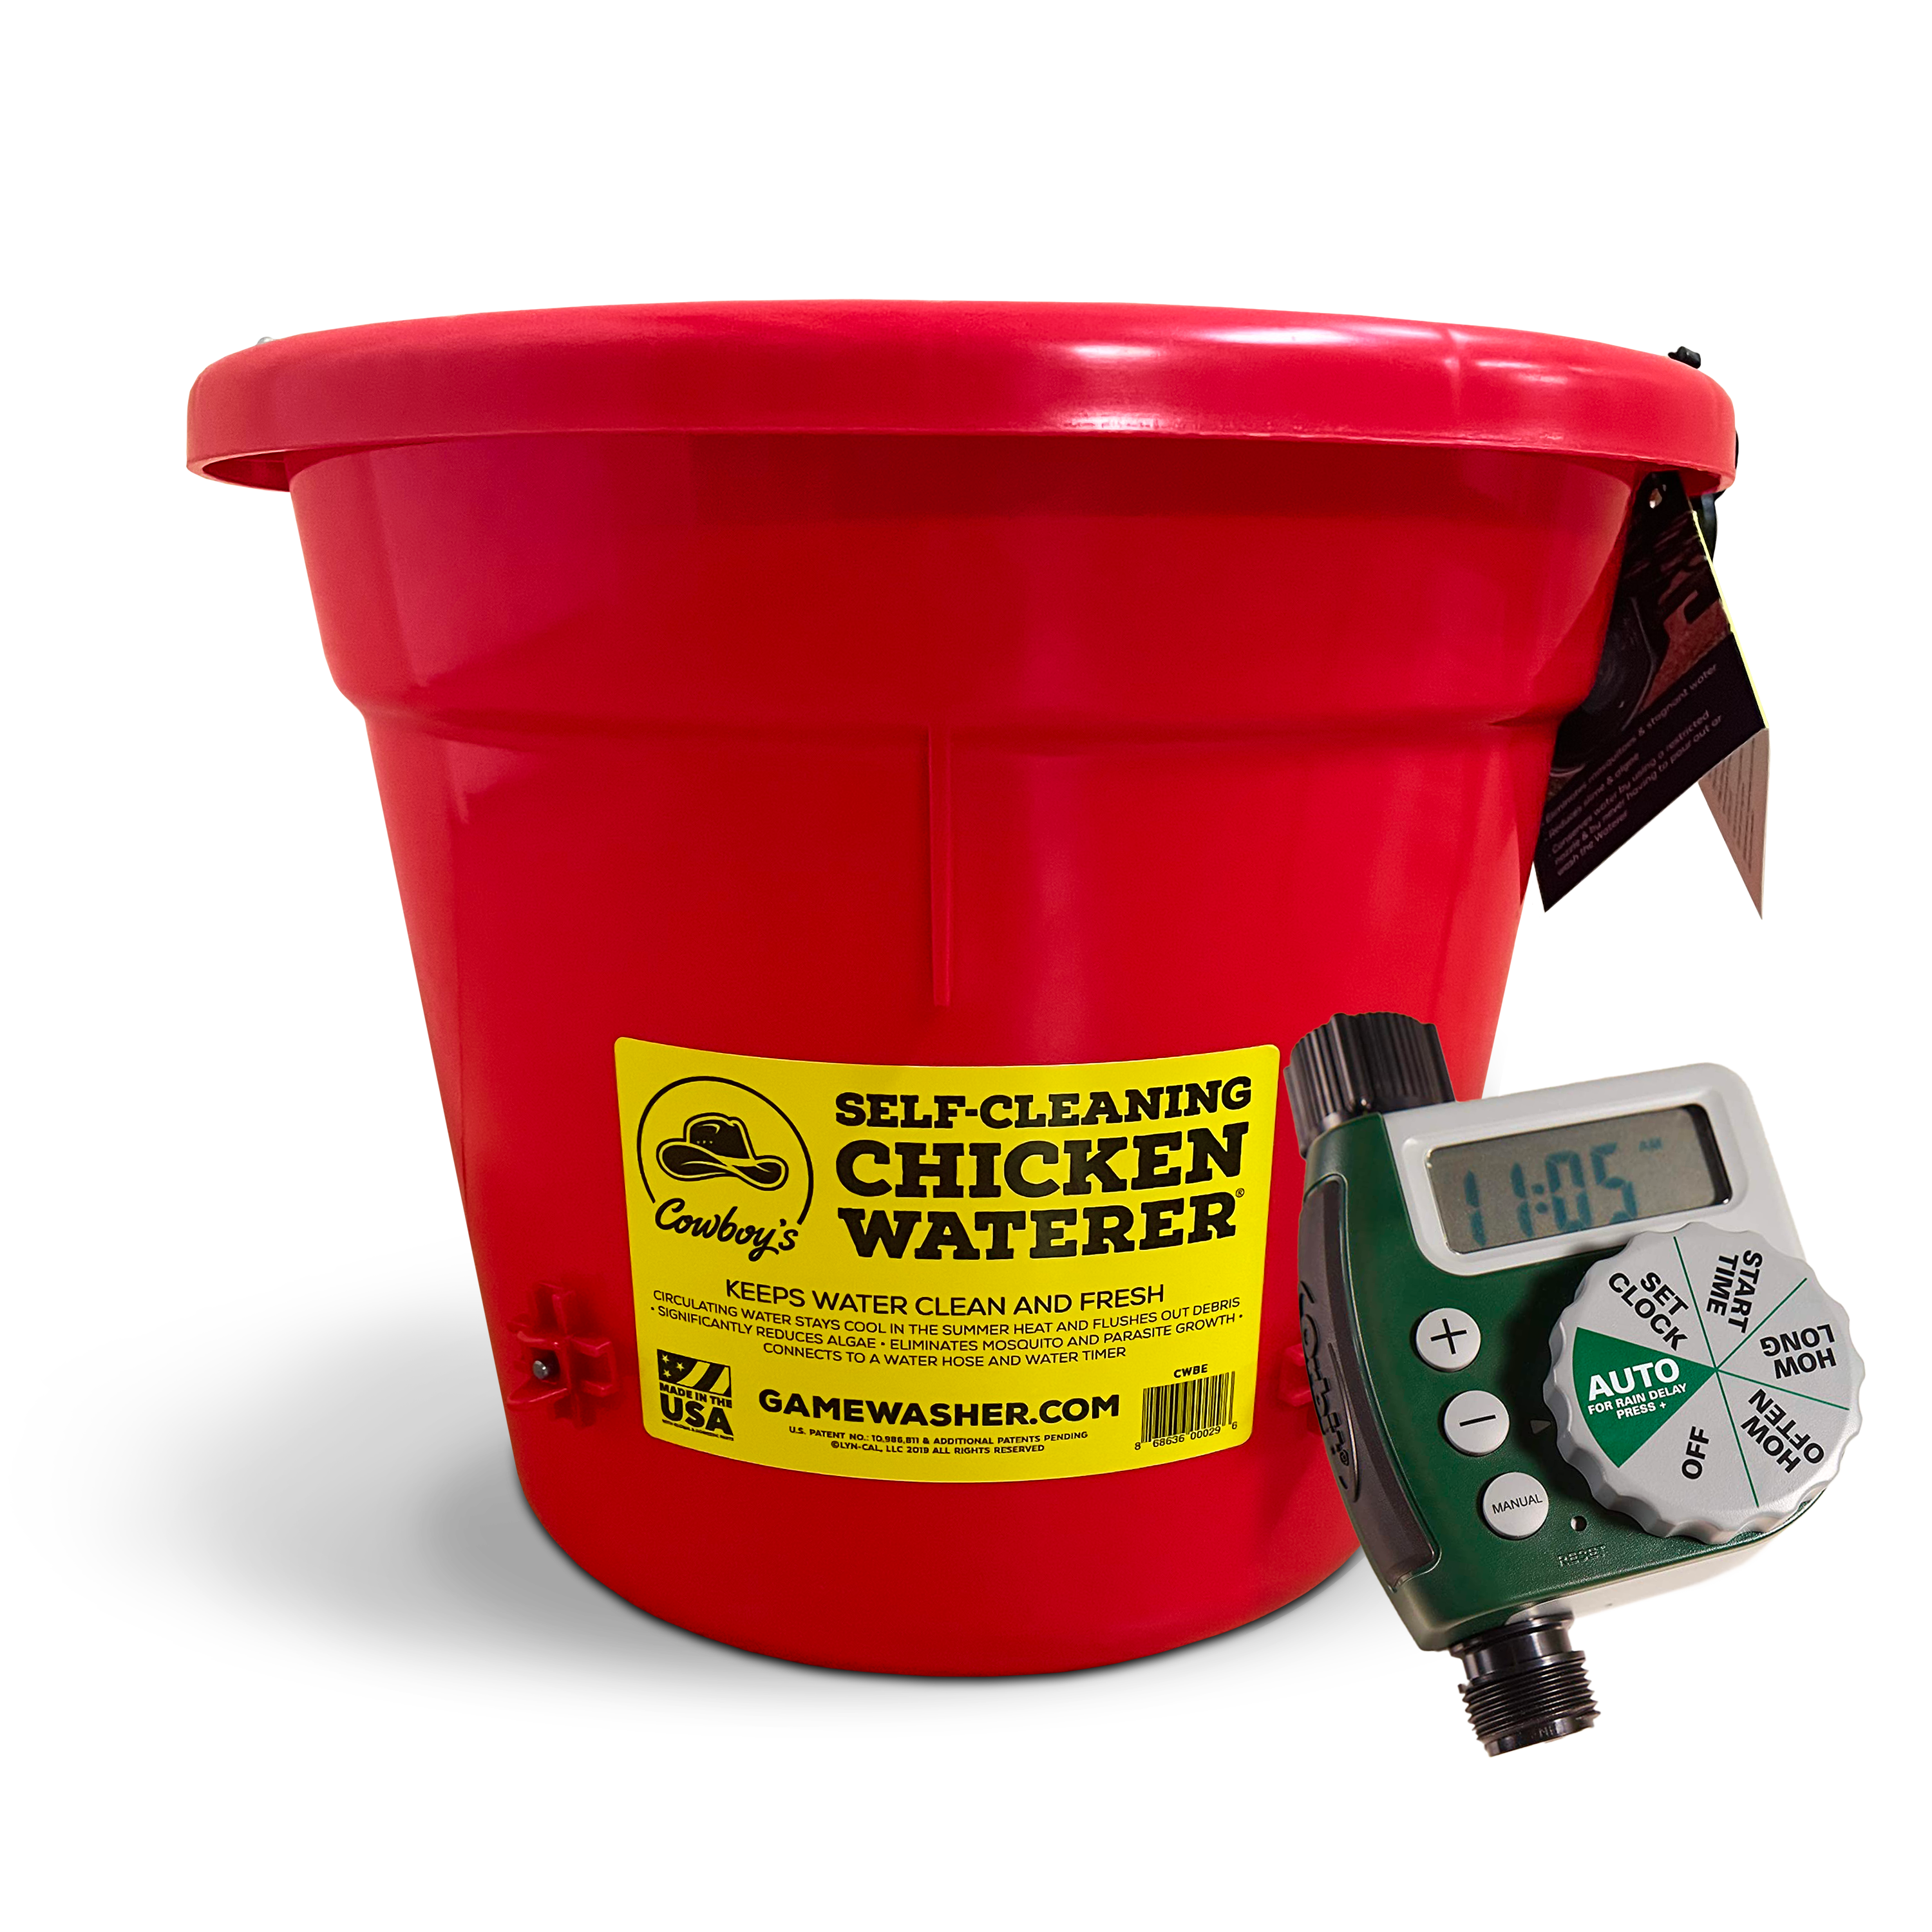 Self-Cleaning Chicken Waterer with Timer - Cowboy's Game Washer